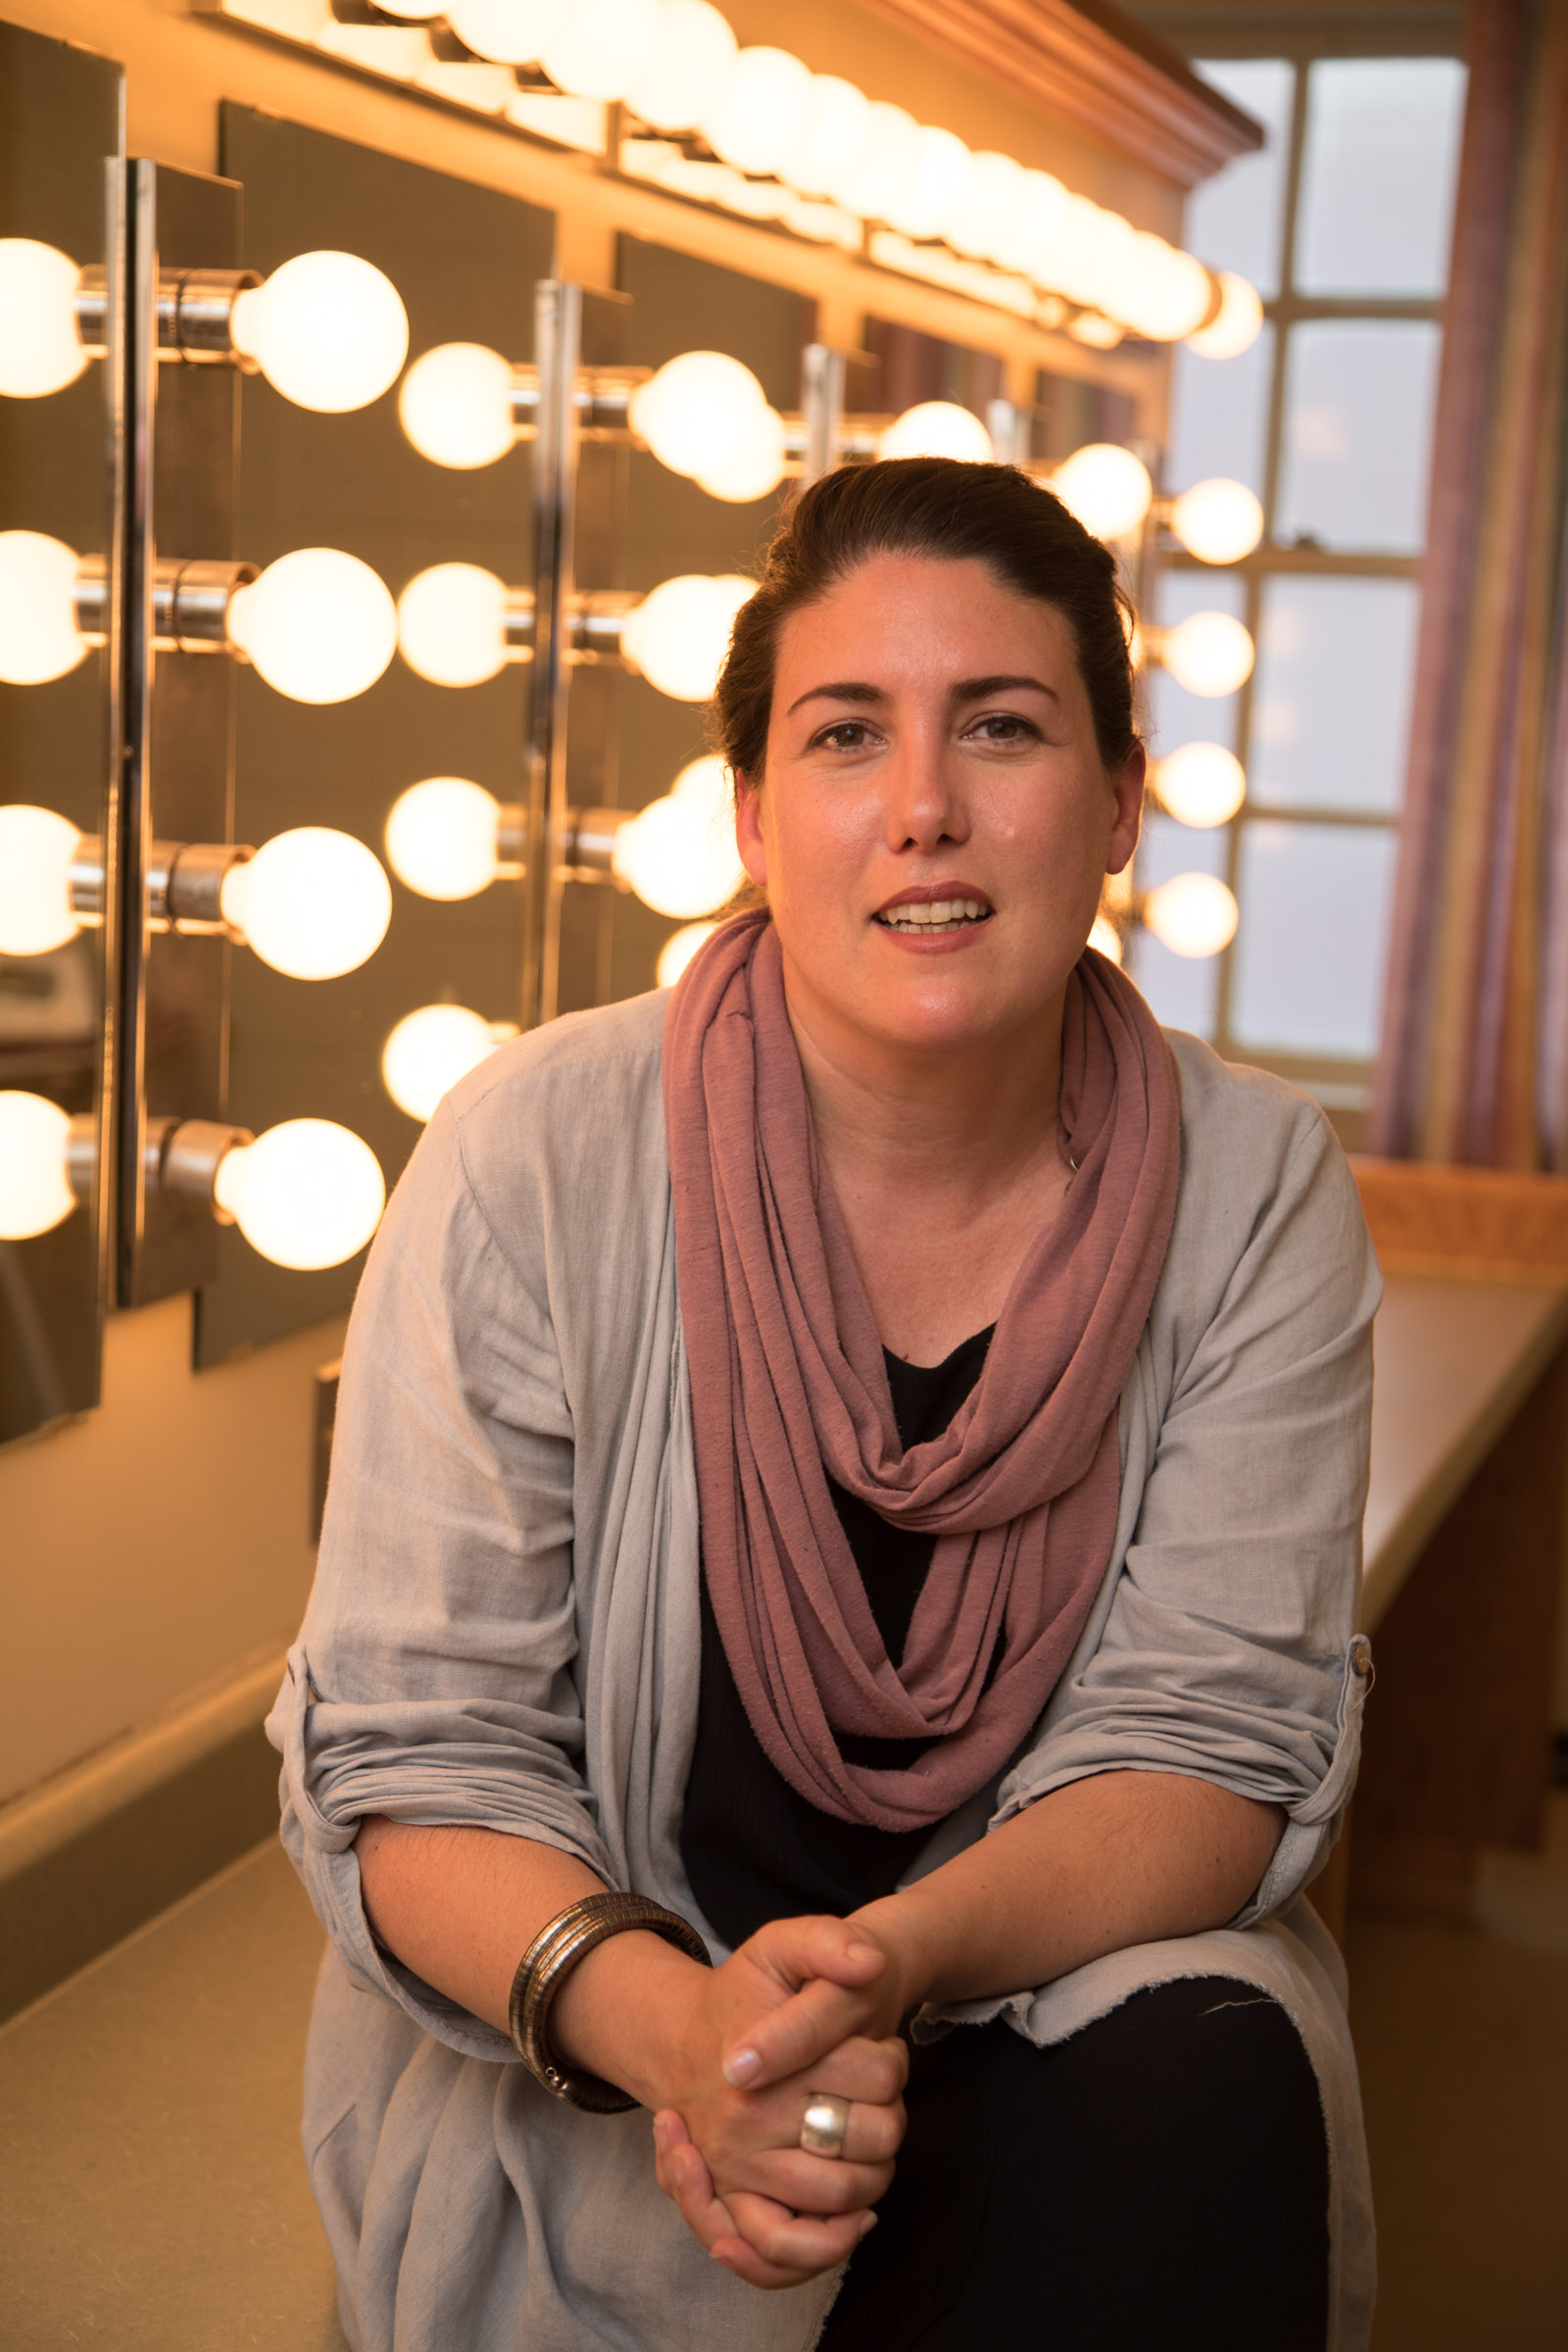 Tania Breen sits in front of the Playhouse dressing room mirrors with lights